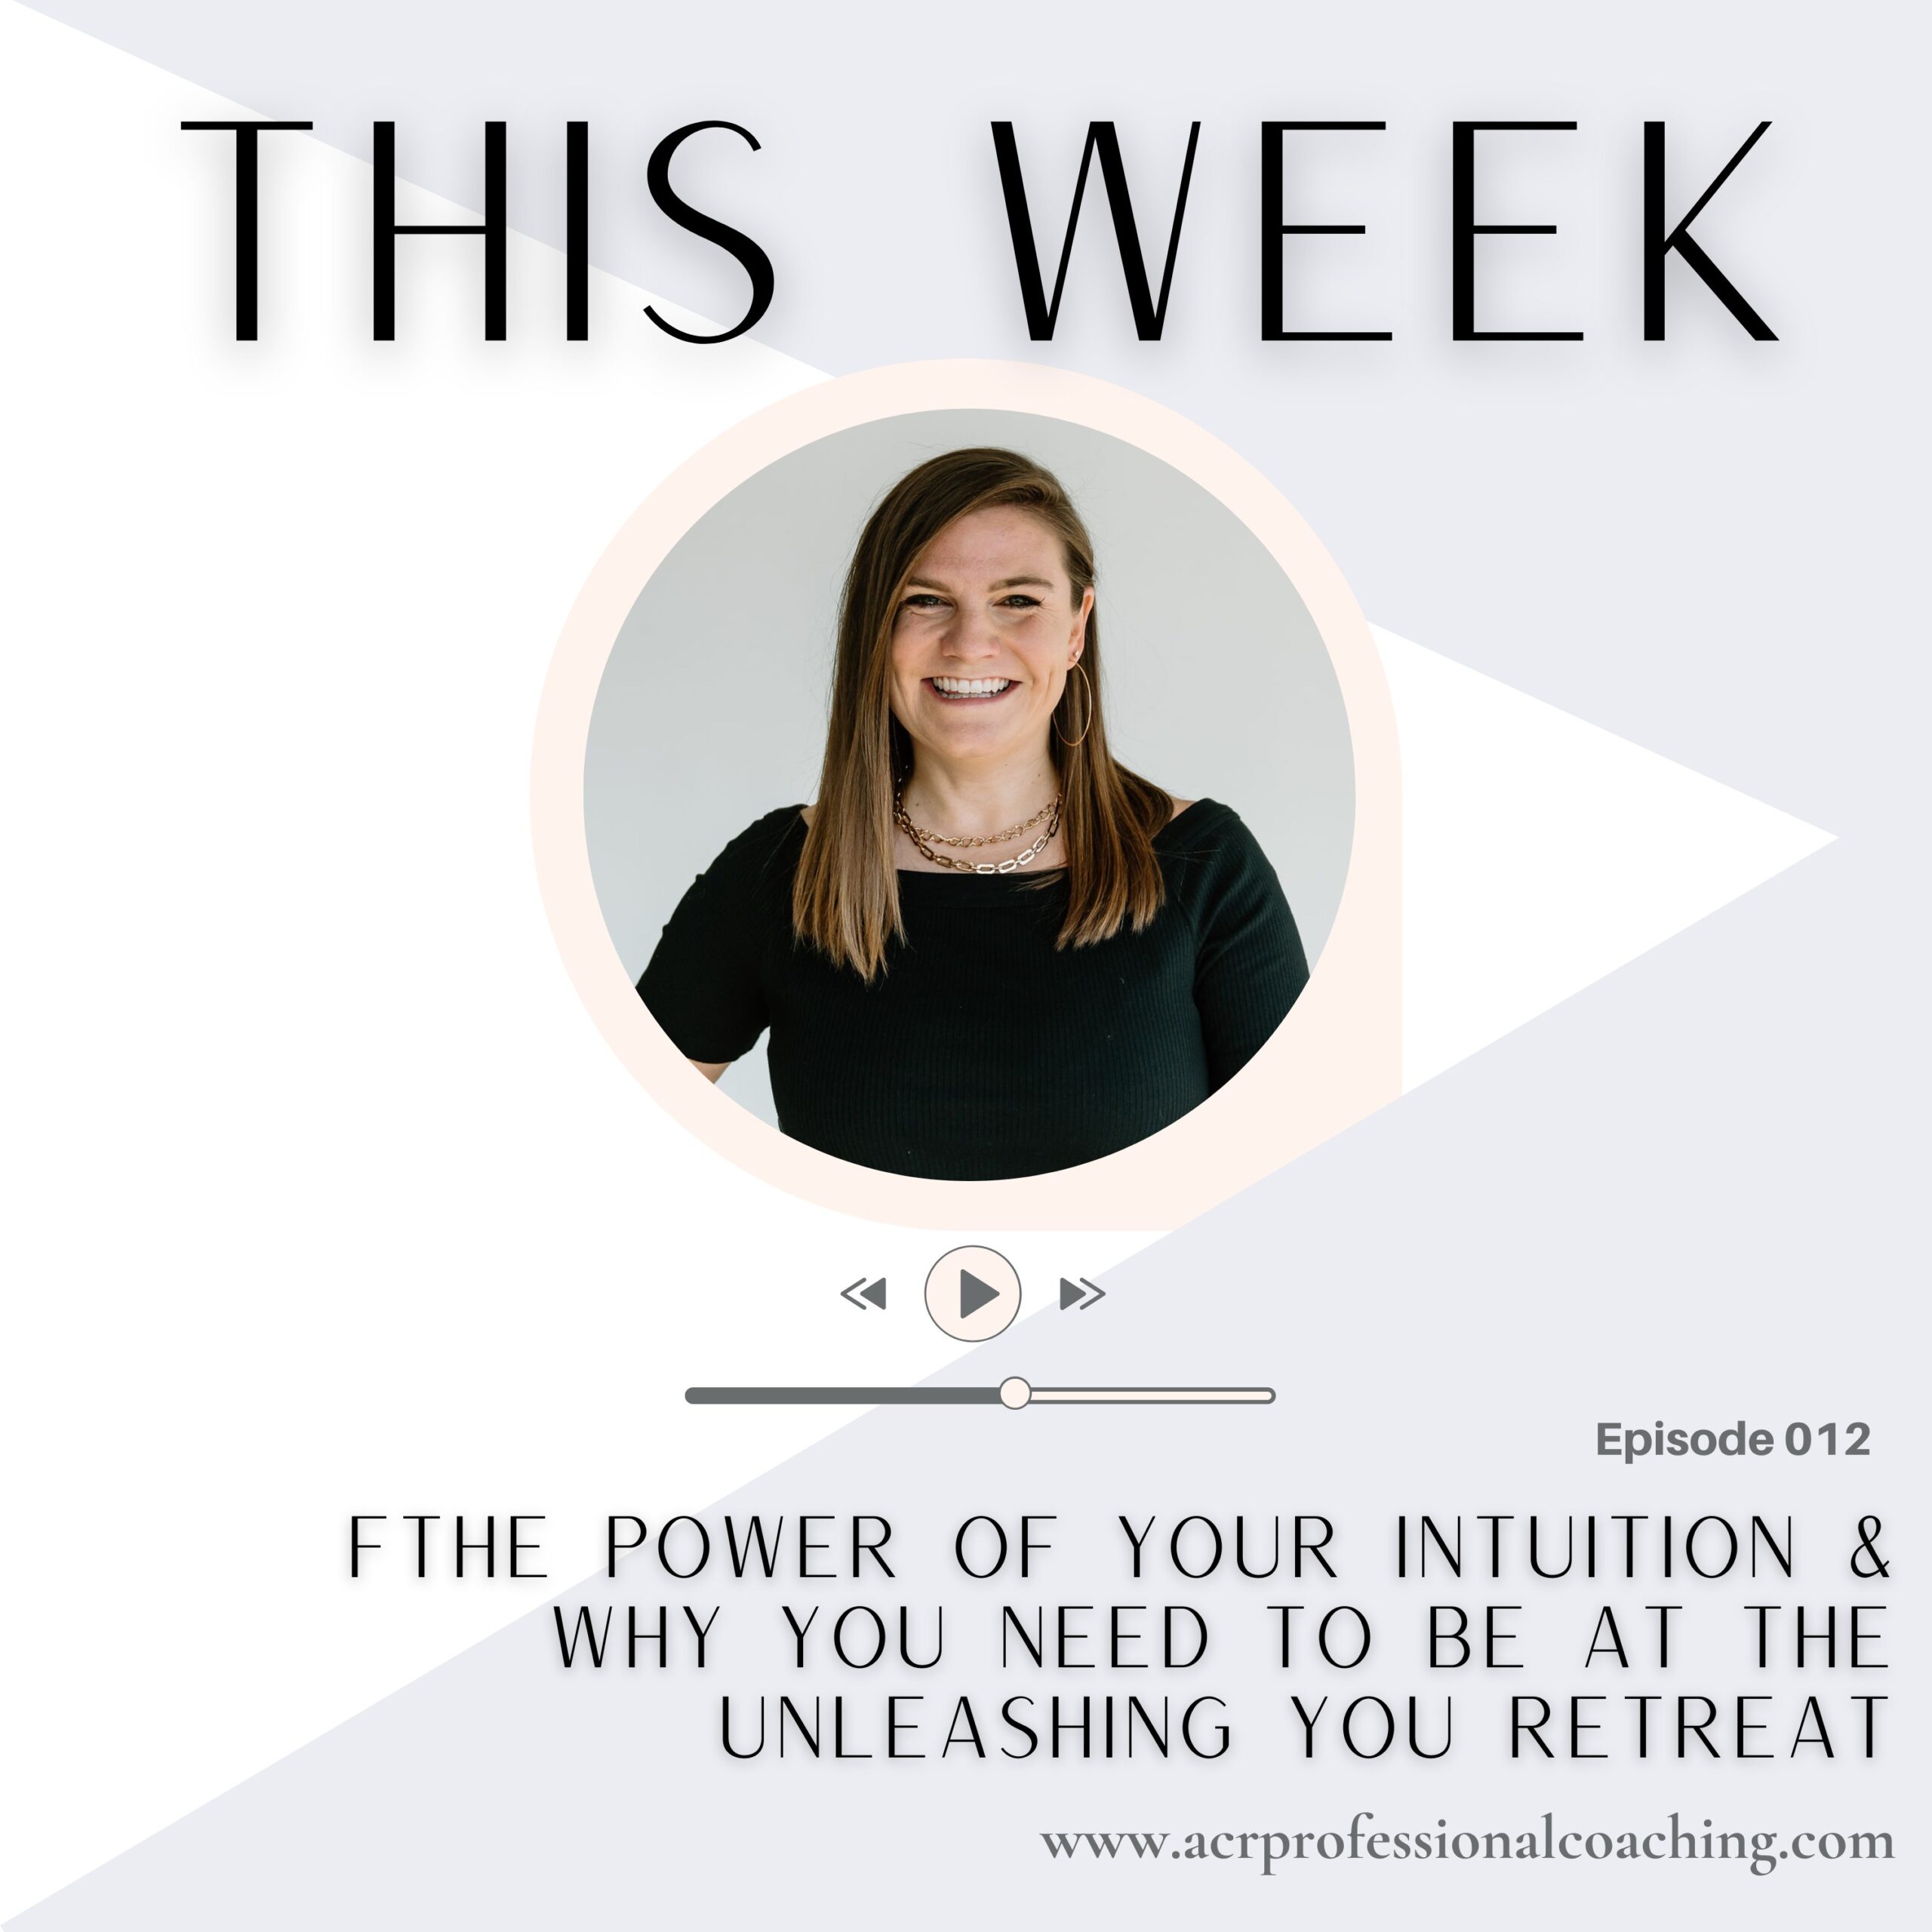 The Power of Your Intuition & Why You Need to be at the Unleashing You Retreat